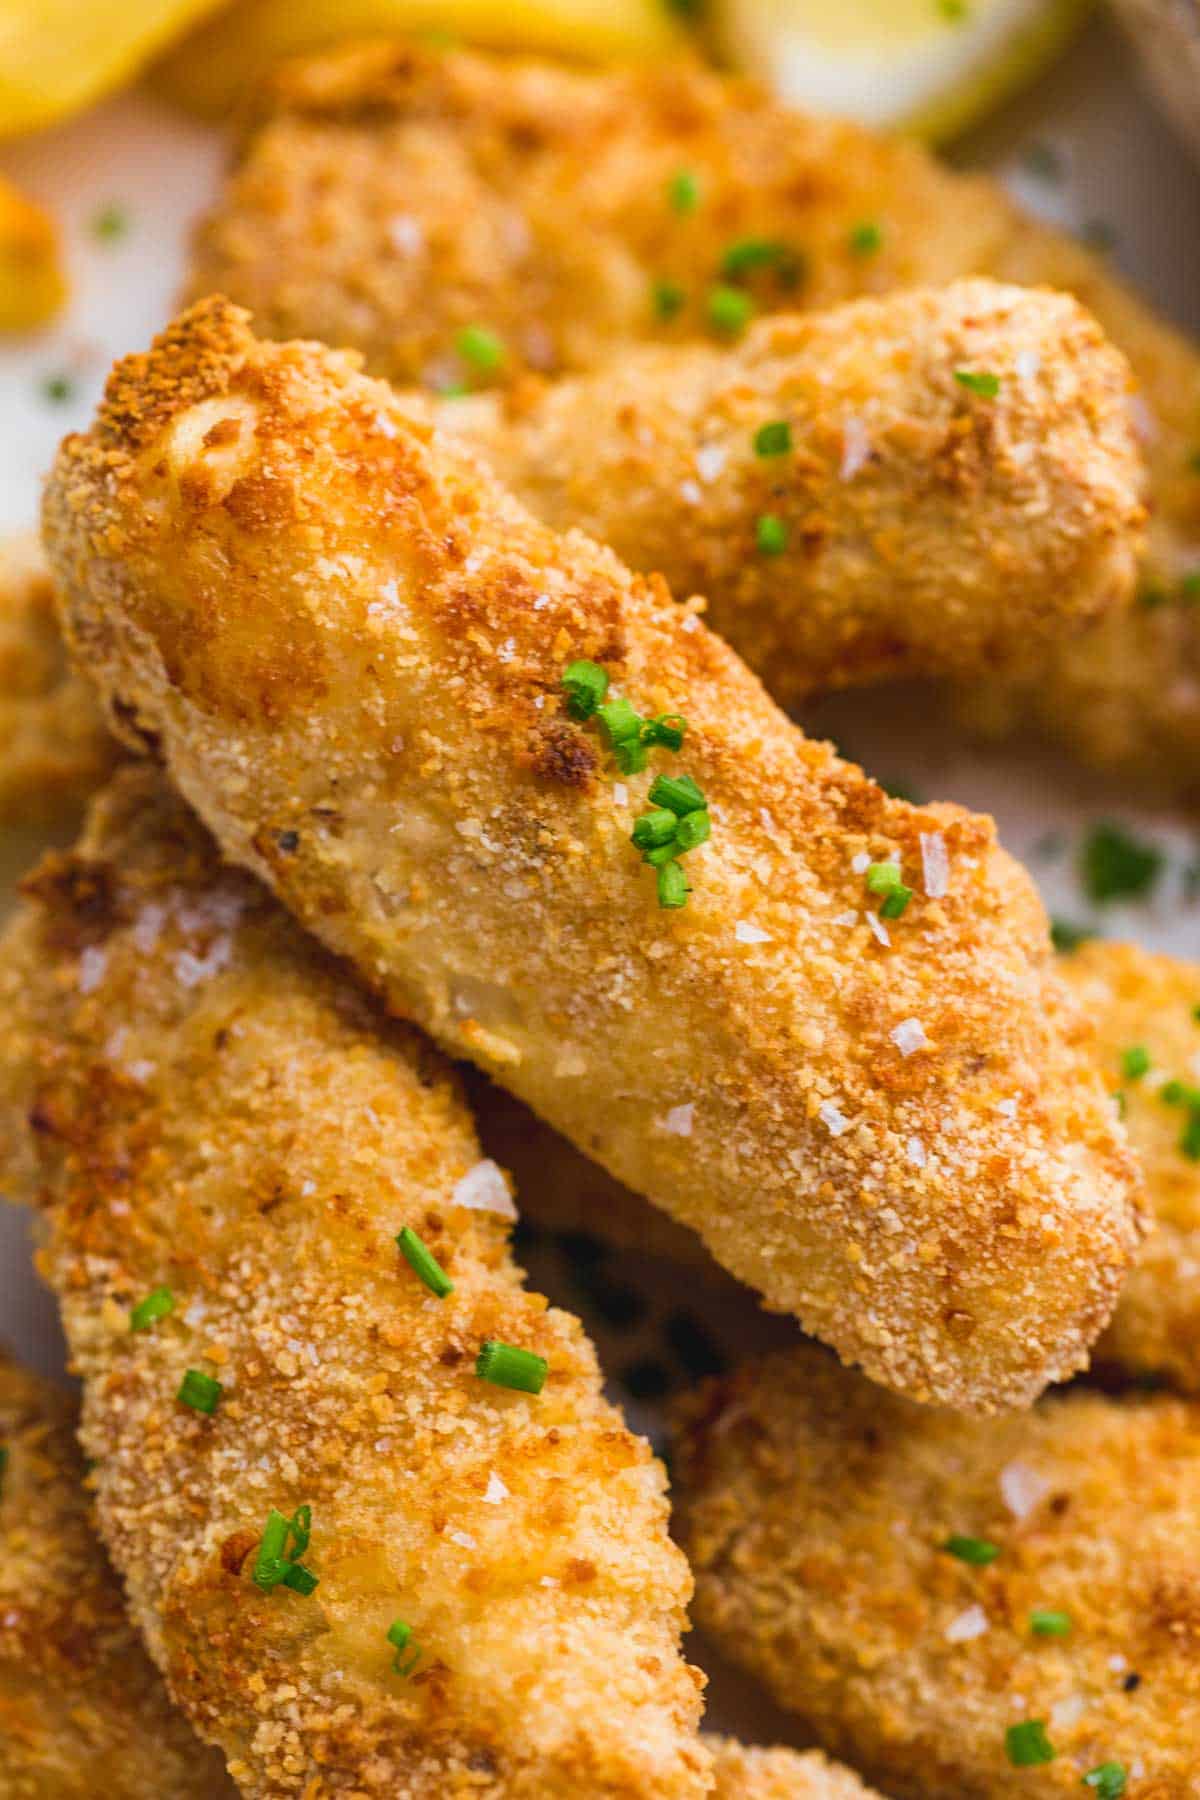 A close up shot of air fryer fish sticks showing the crispy breading